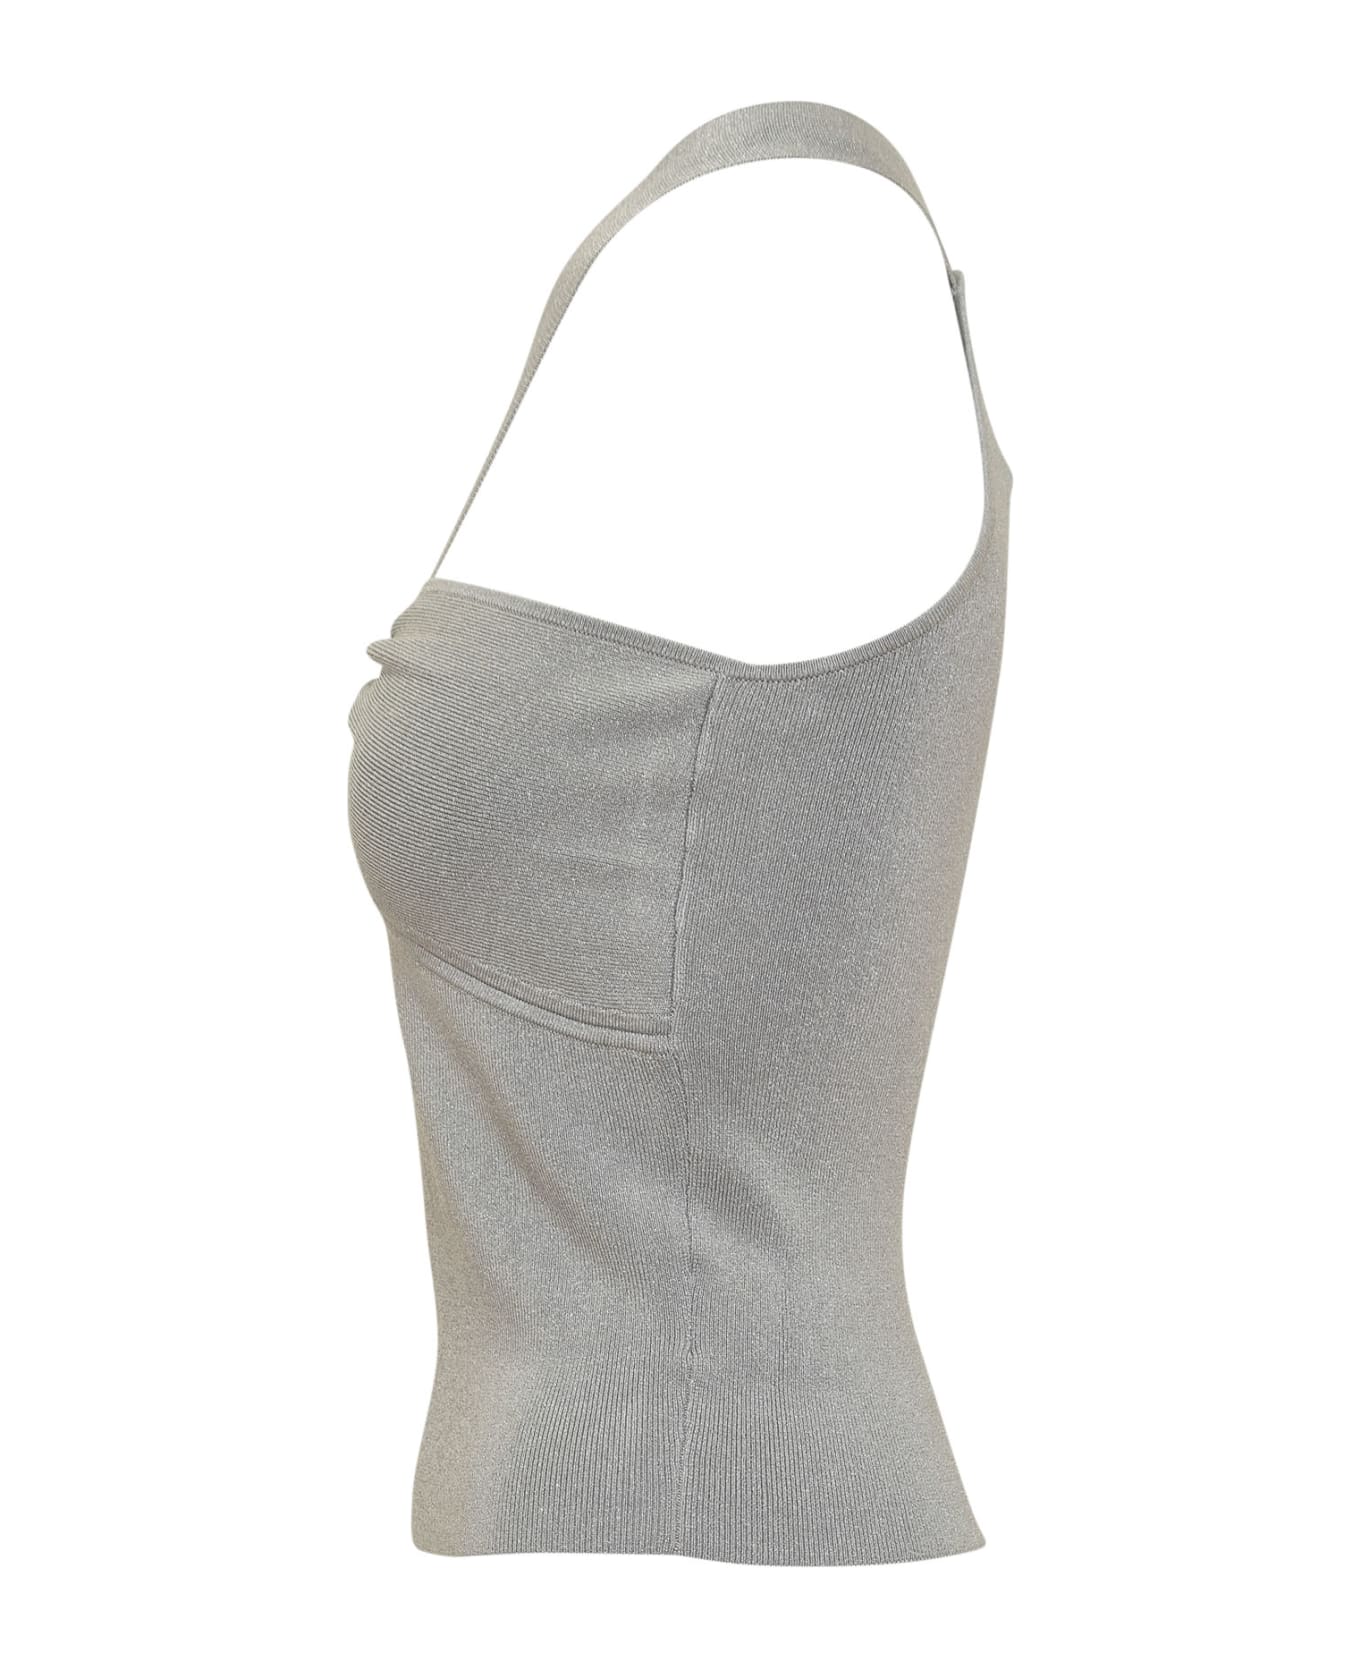 Michael Kors Top With Drop Opening - Silver トップス